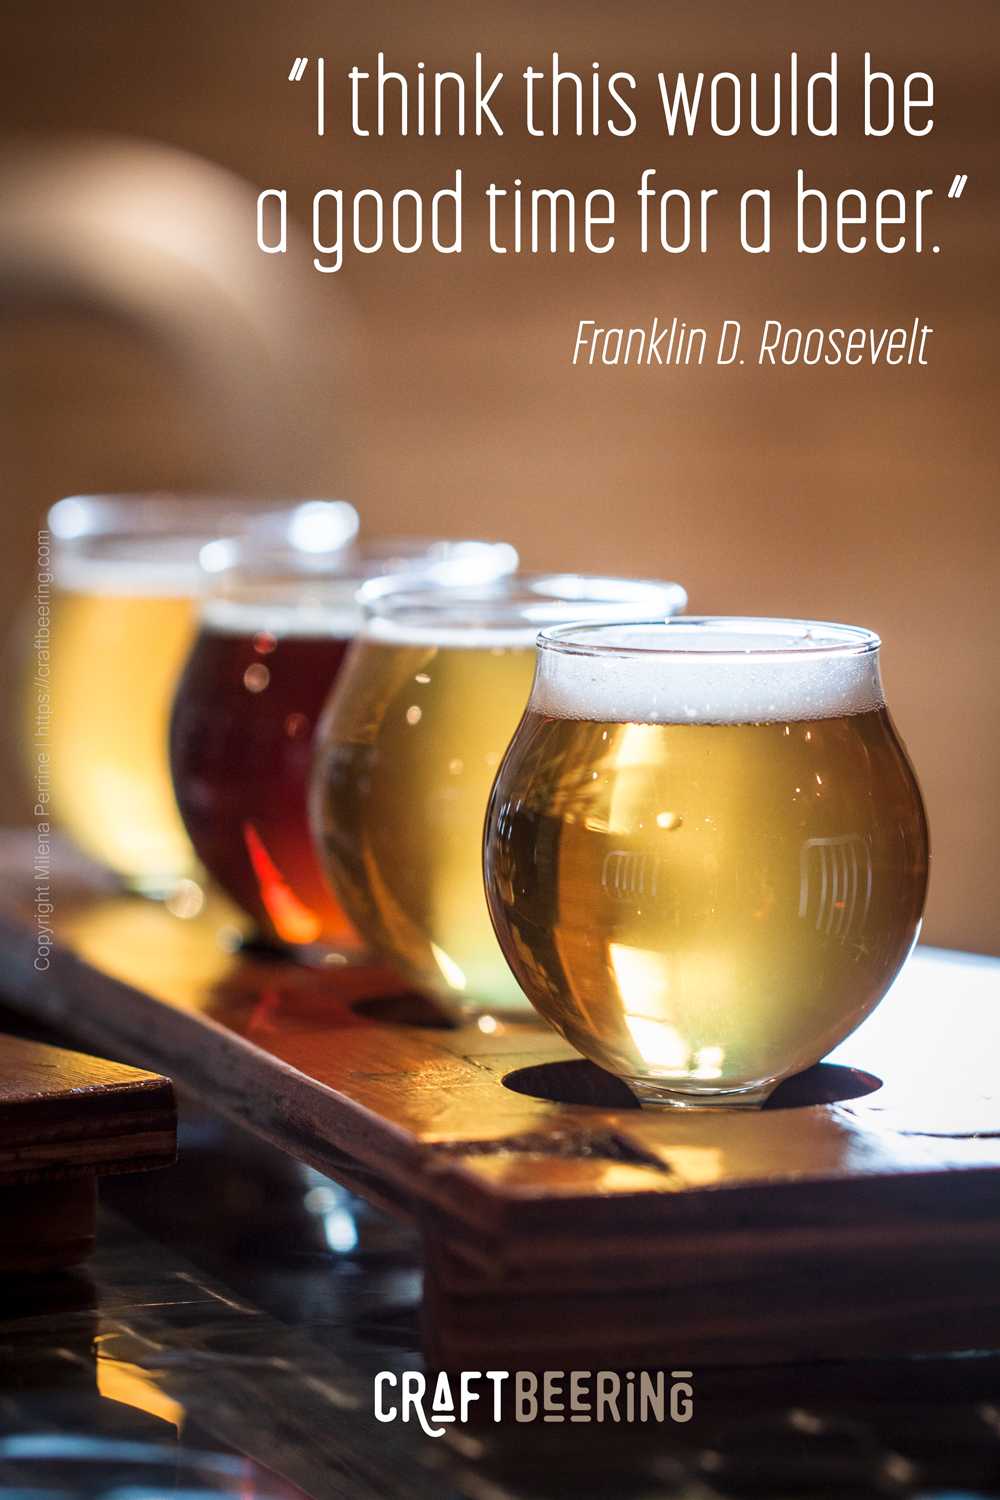 National Beer day, April 7th Roosevelt quote.